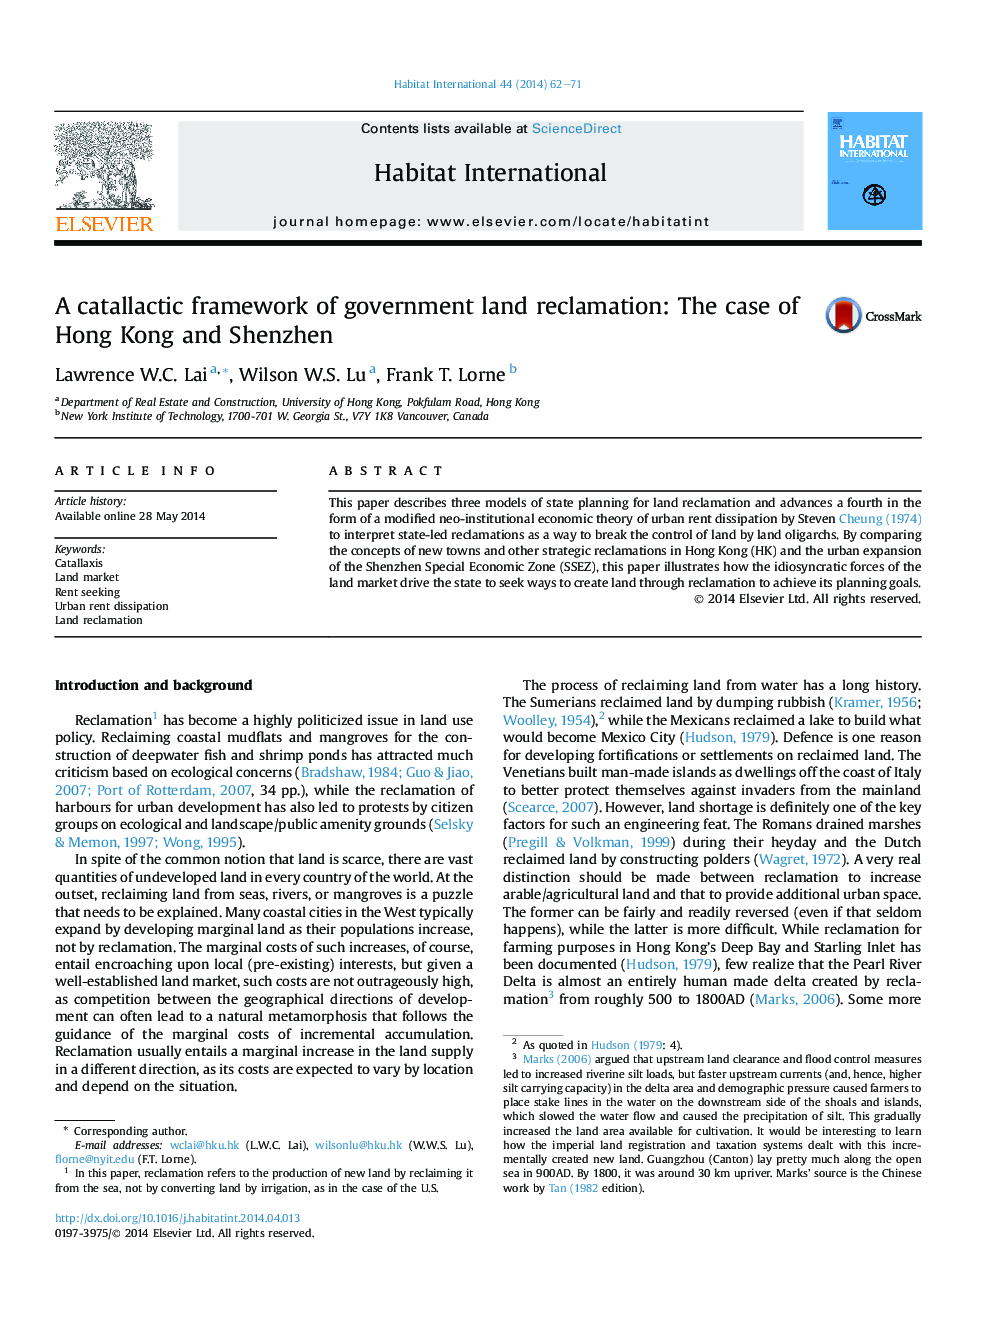 A catallactic framework of government land reclamation: The case of Hong Kong and Shenzhen